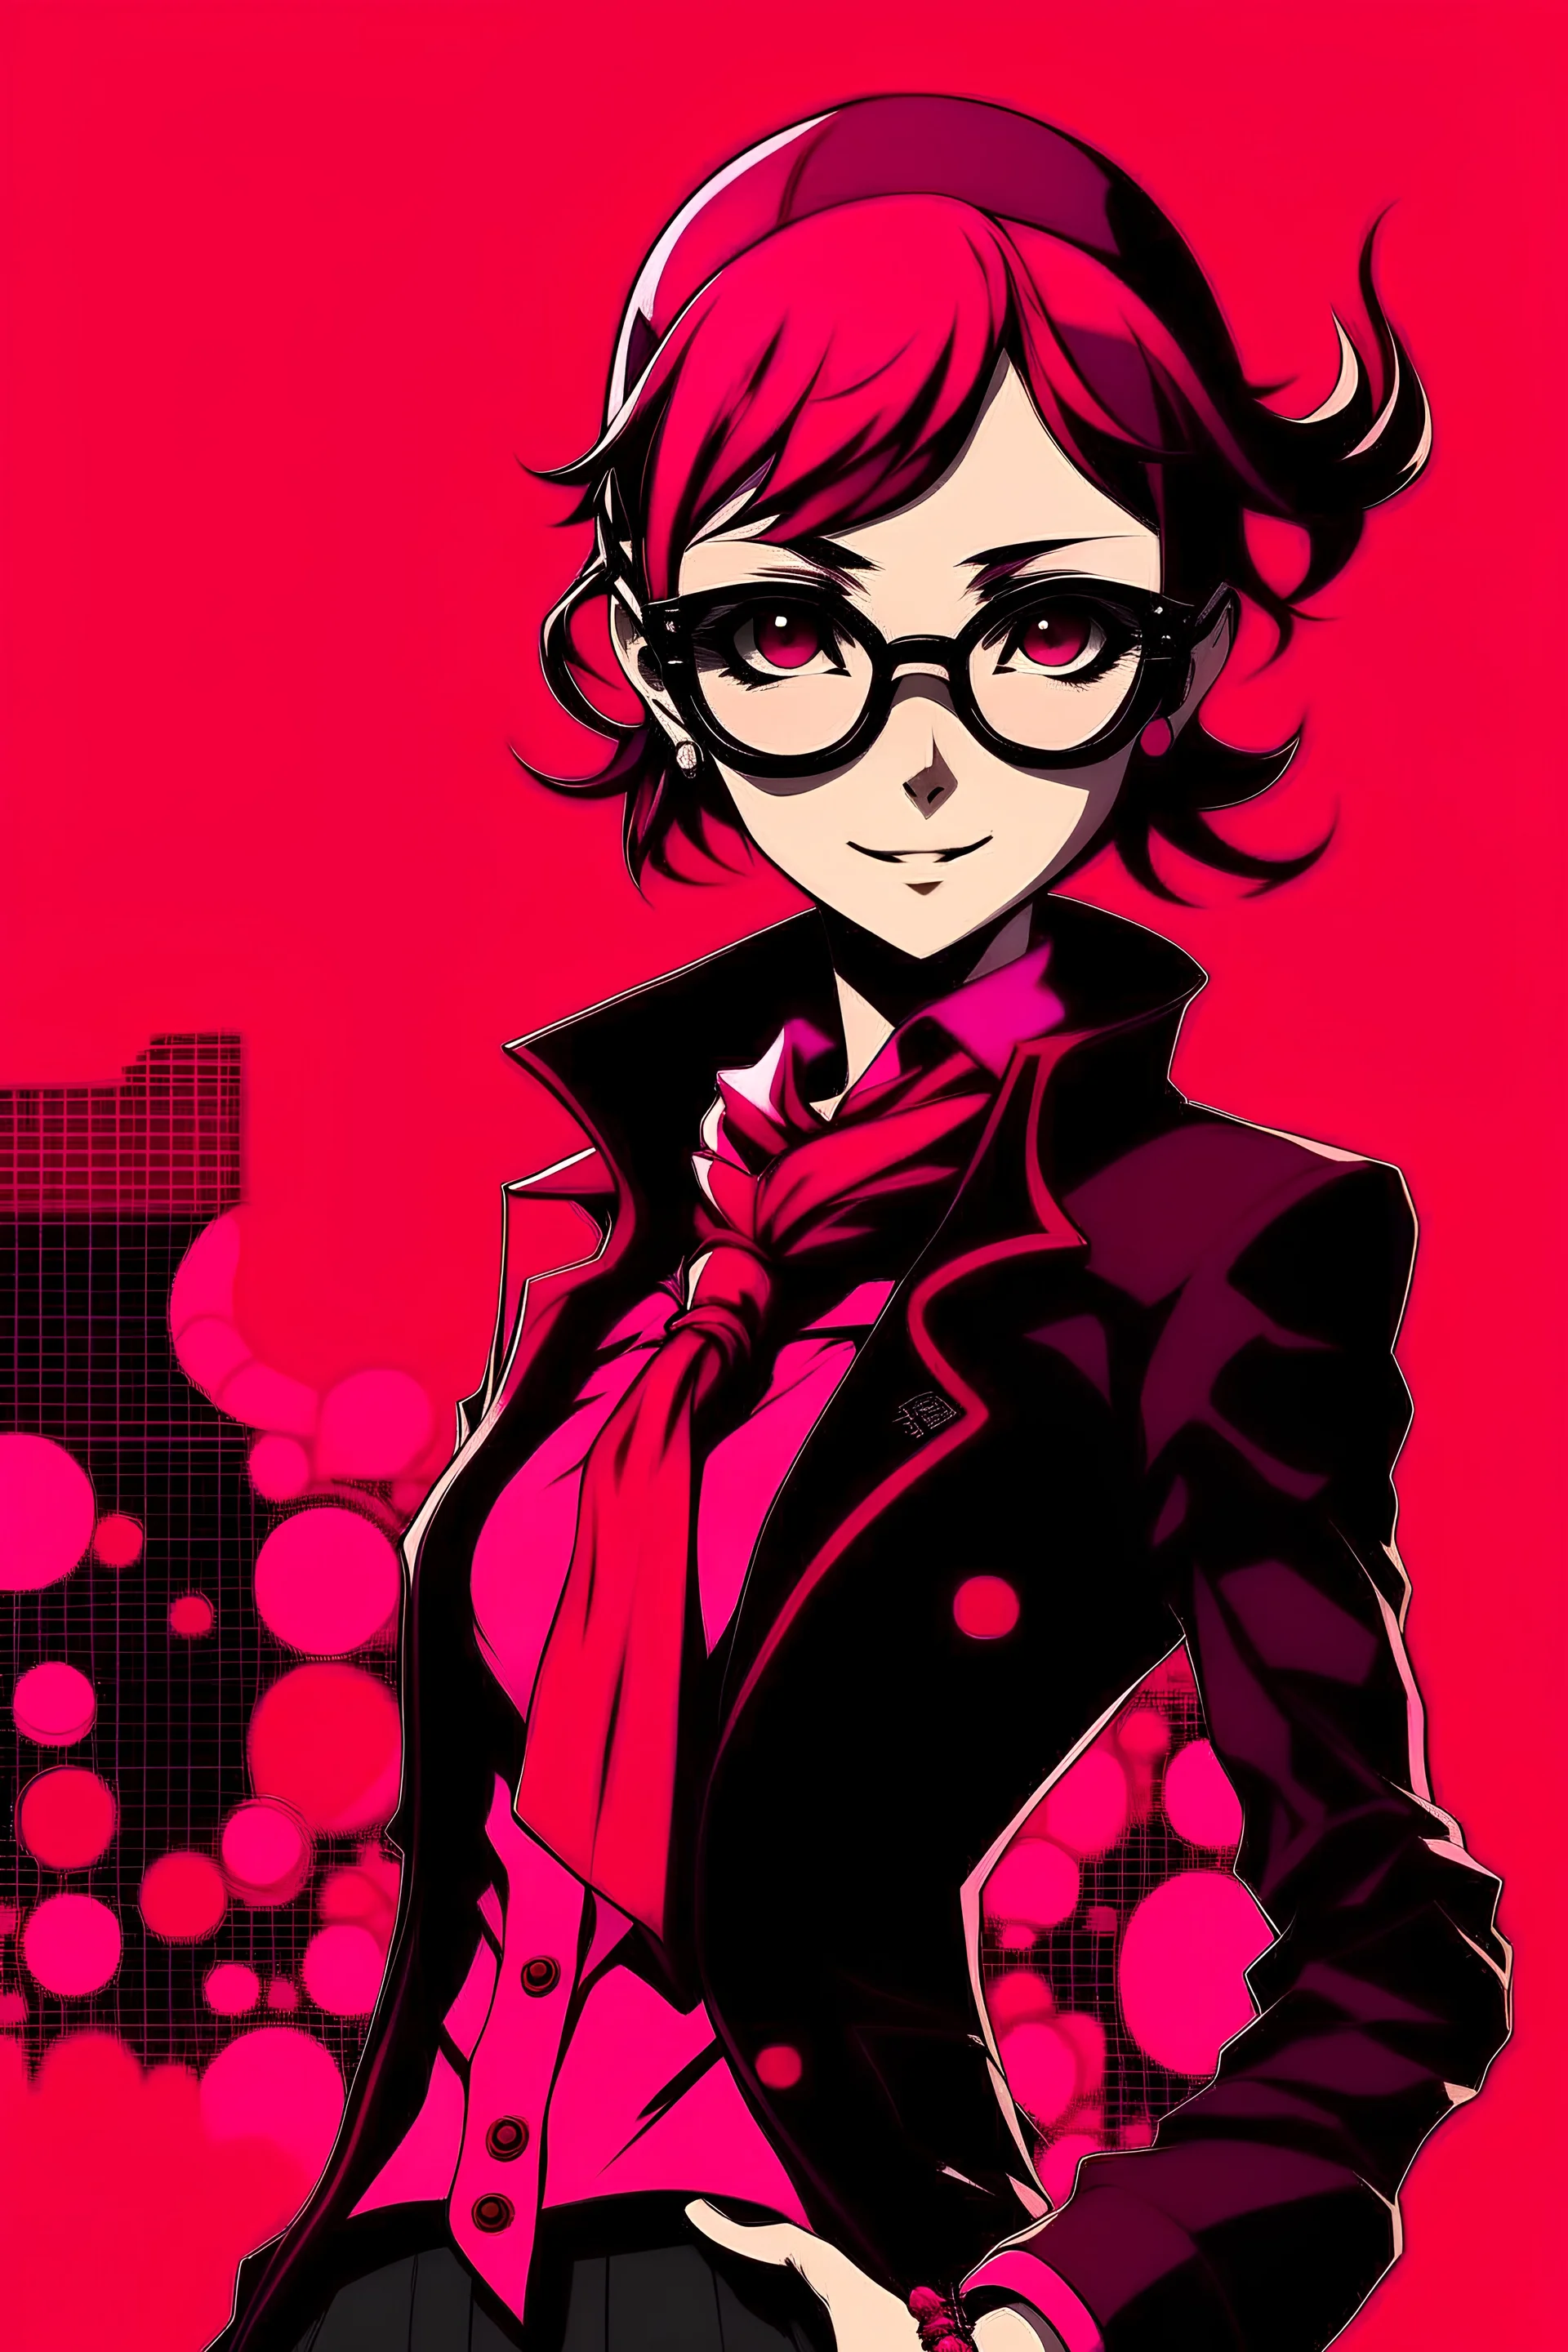 persona 5 style background and pink character